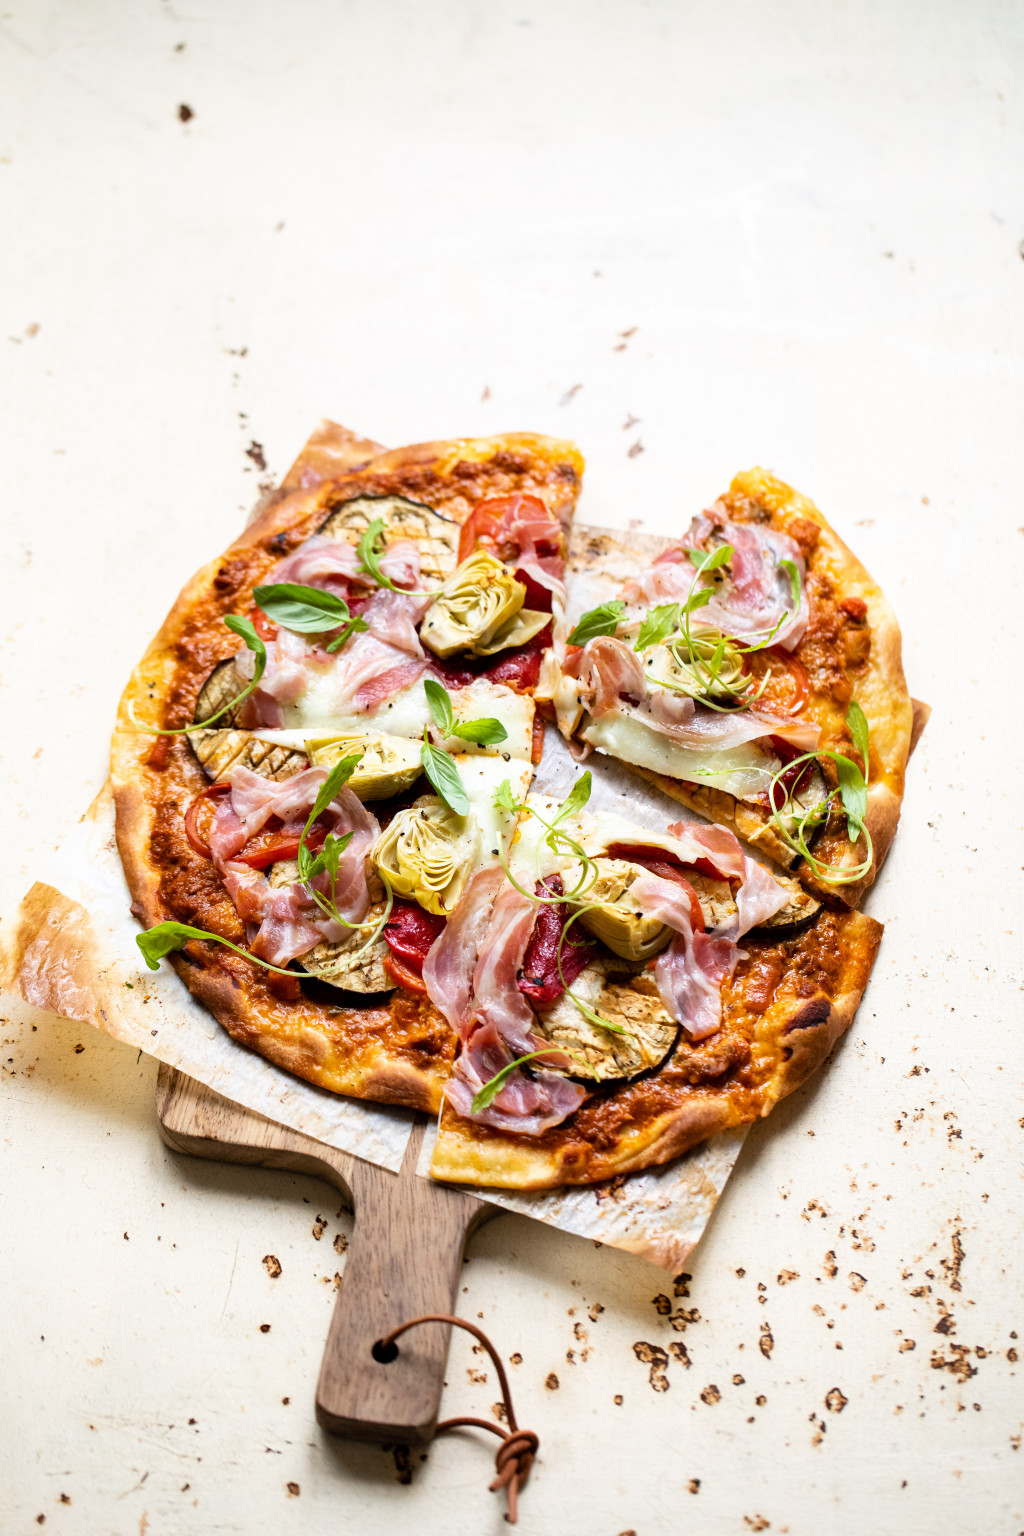 Vegetable Pizza with Tholognese Sauce